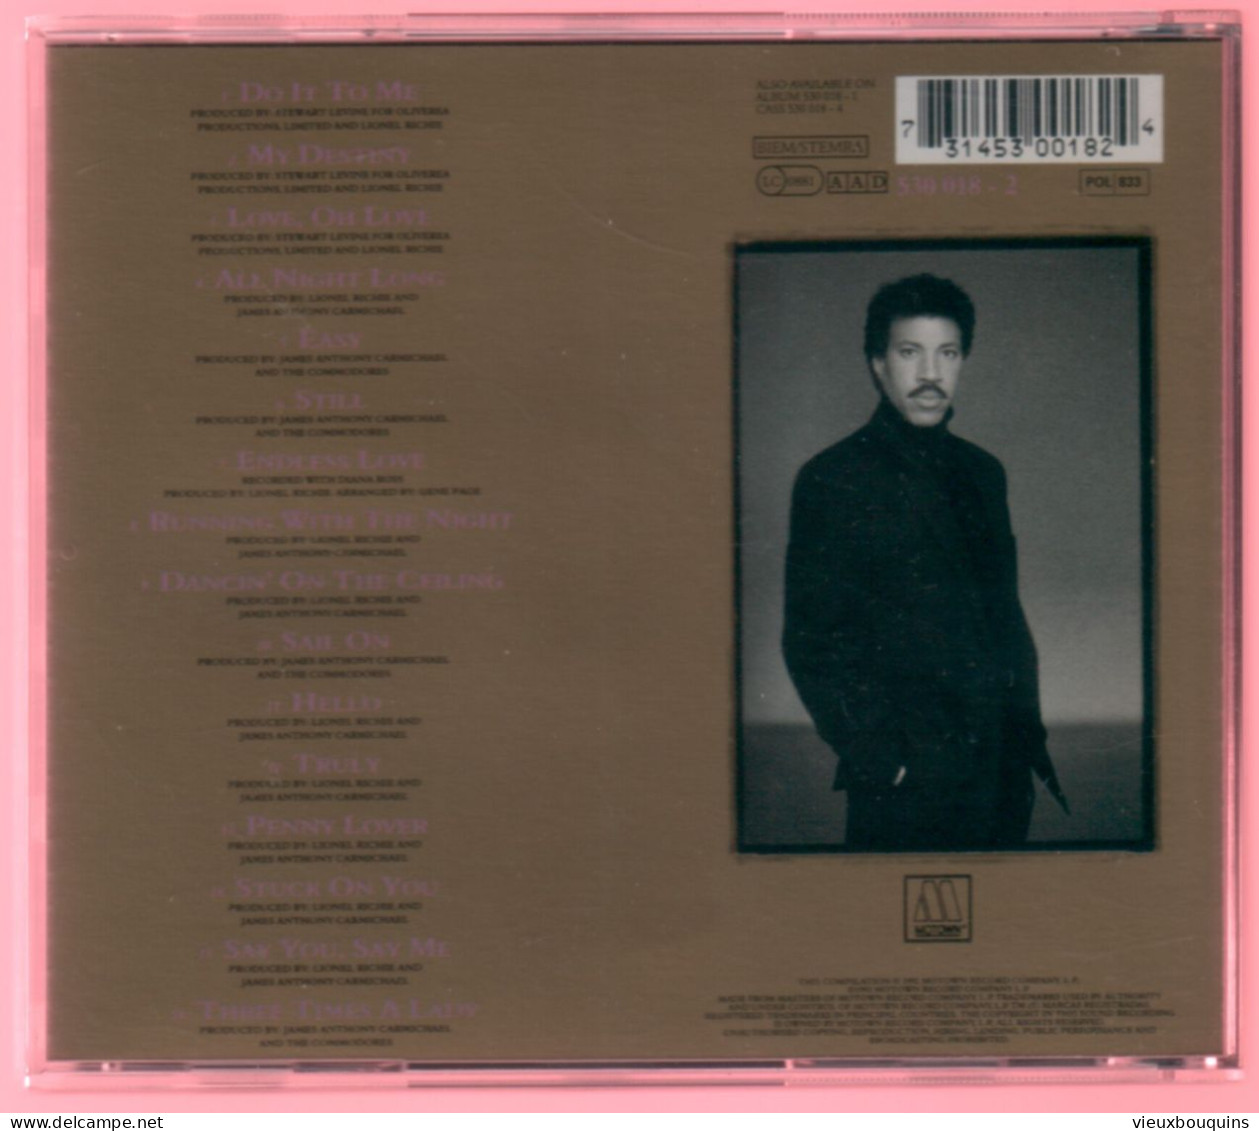 LIONEL RITCHIE : BACK TO FRONT - Other - English Music